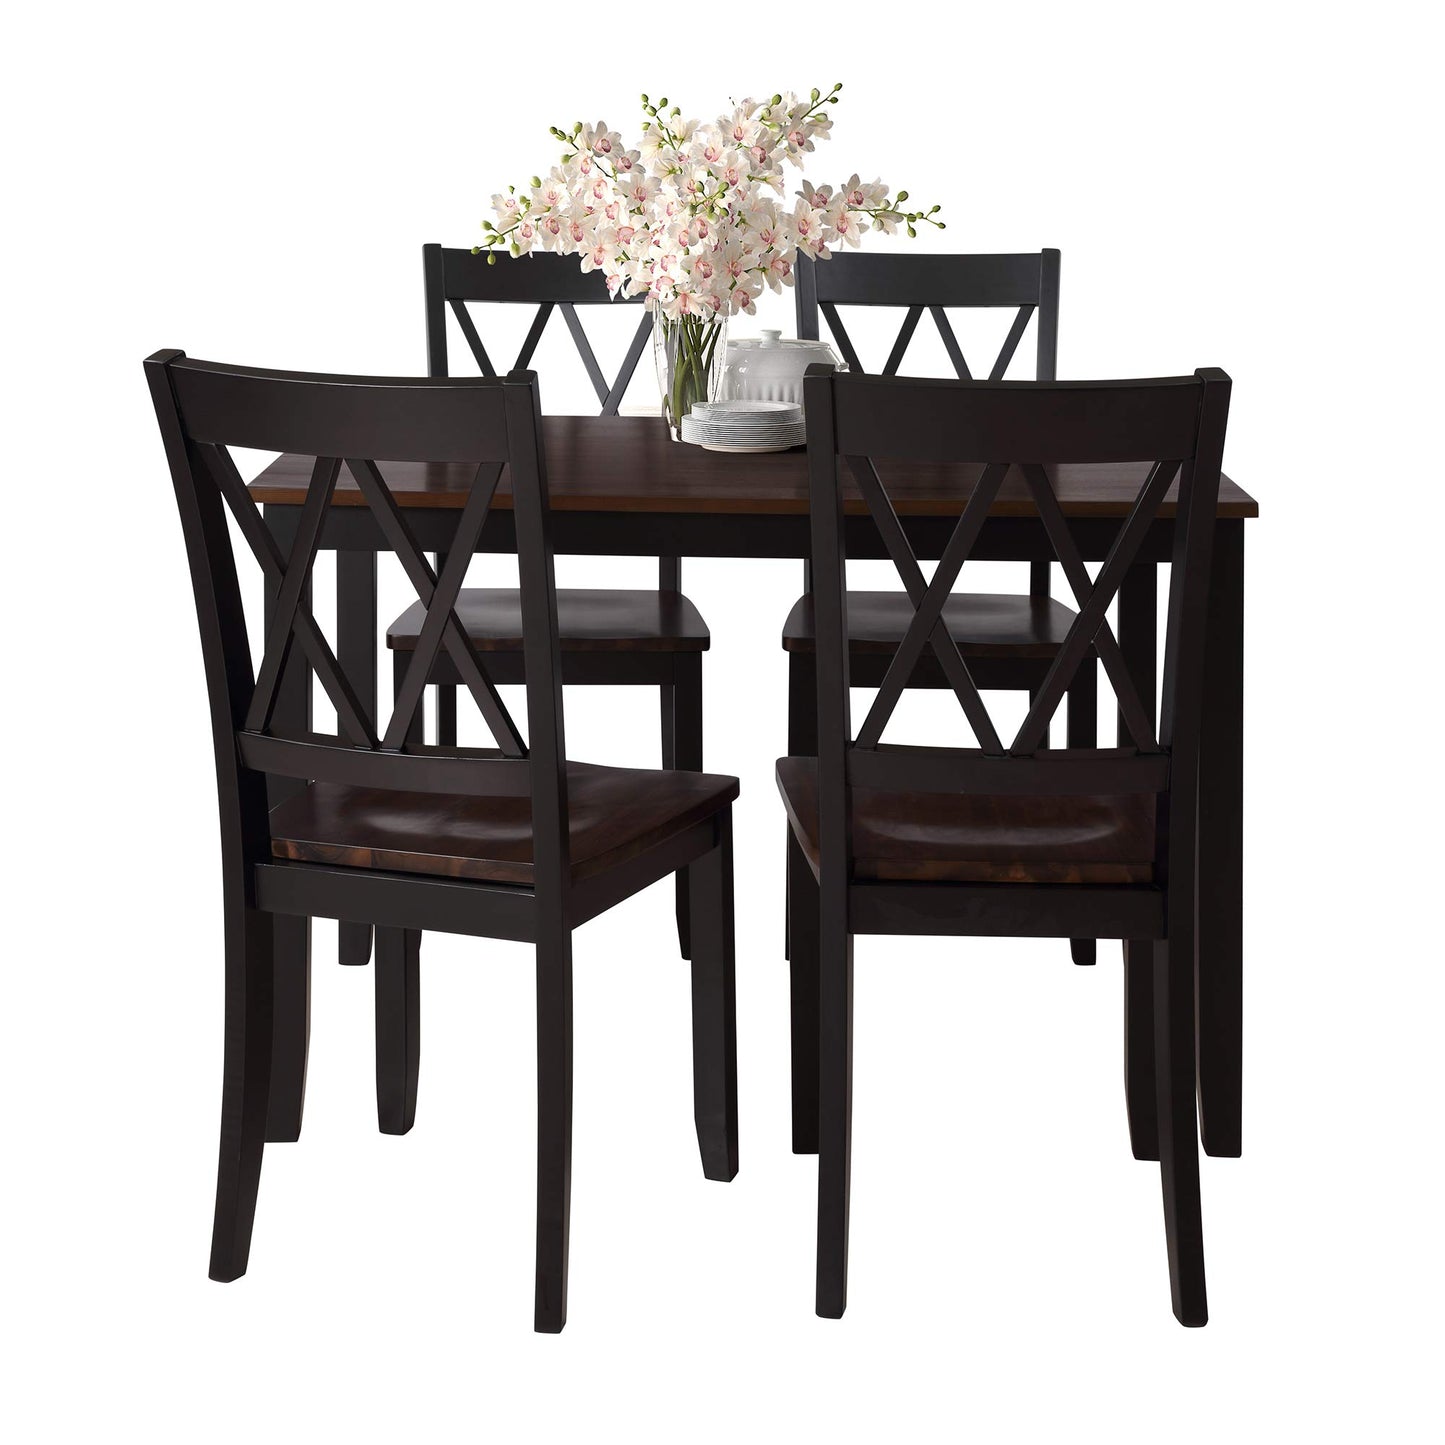 Harper & Bright Designs 5-Piece Wood Dining Table Set for 4, Kitchen Furniture Set with 4 High Back Dining Chairs for Small Places,Black+Cherry